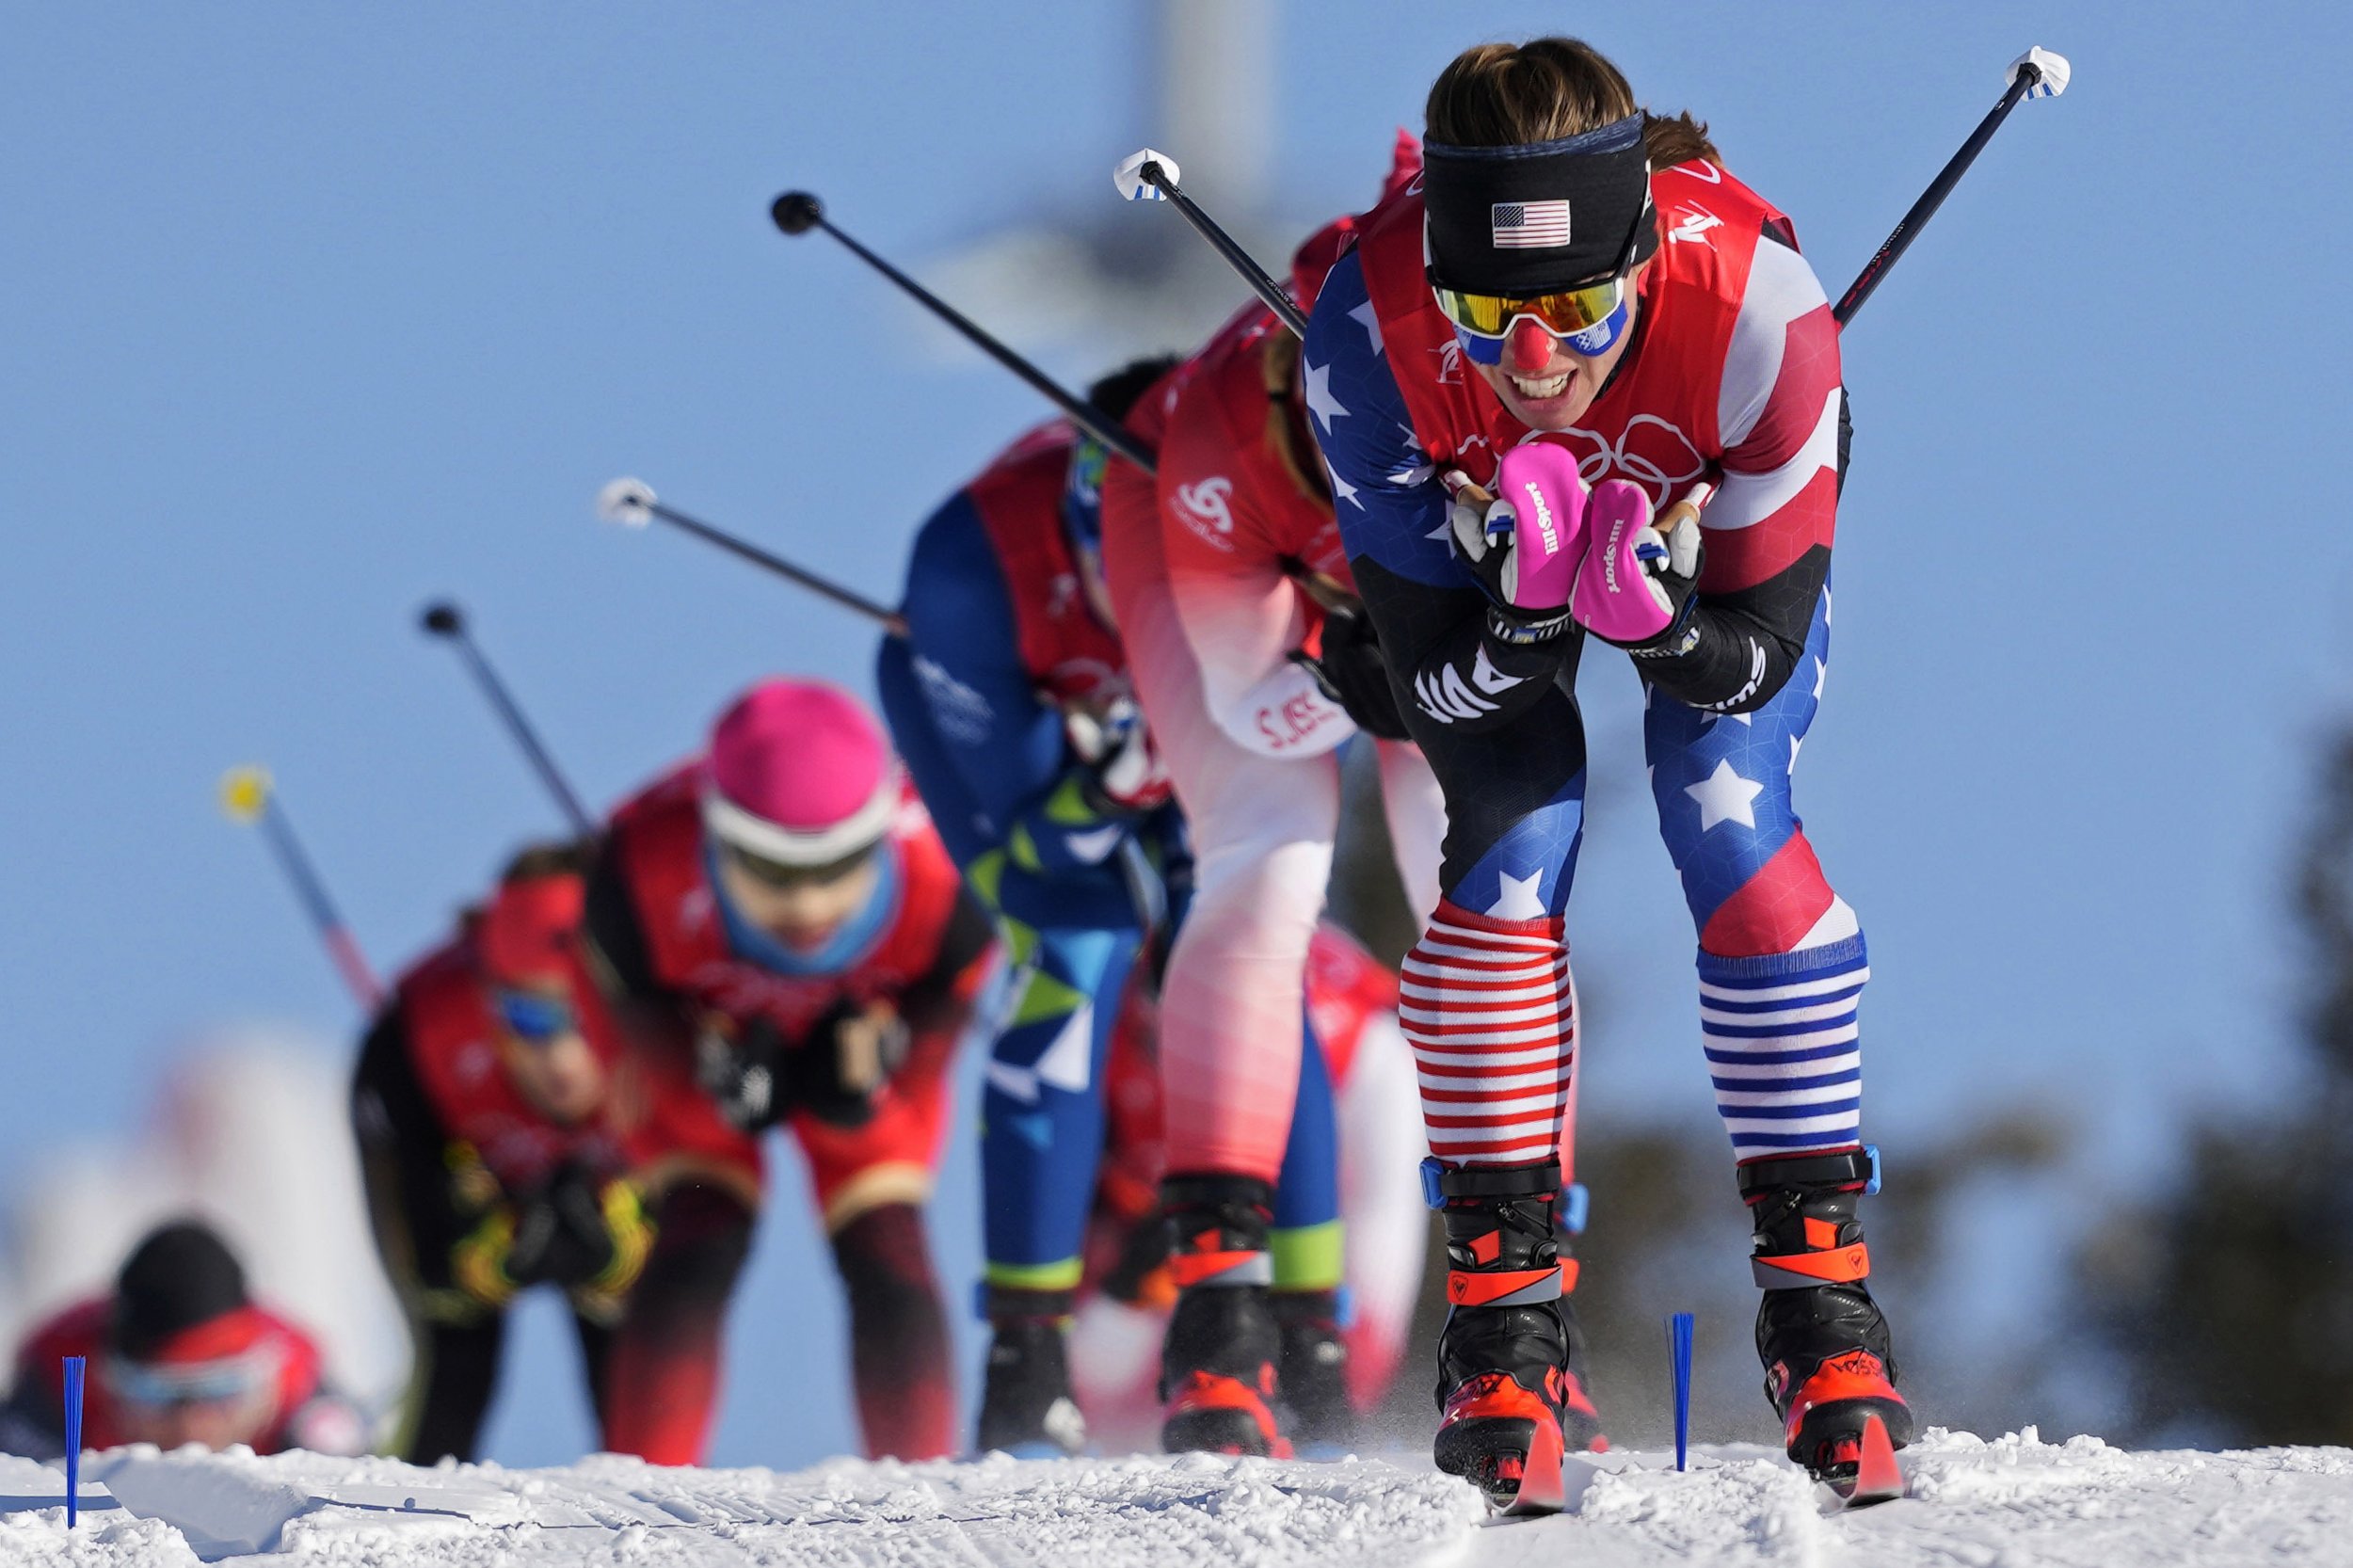  Rosie Brennan leads a group during the women's team sprint classic cross-country skiing competition at the 2022 Winter Olympics, Wednesday, Feb. 16, 2022, in Zhangjiakou, China. (AP Photo/Aaron Favila) 